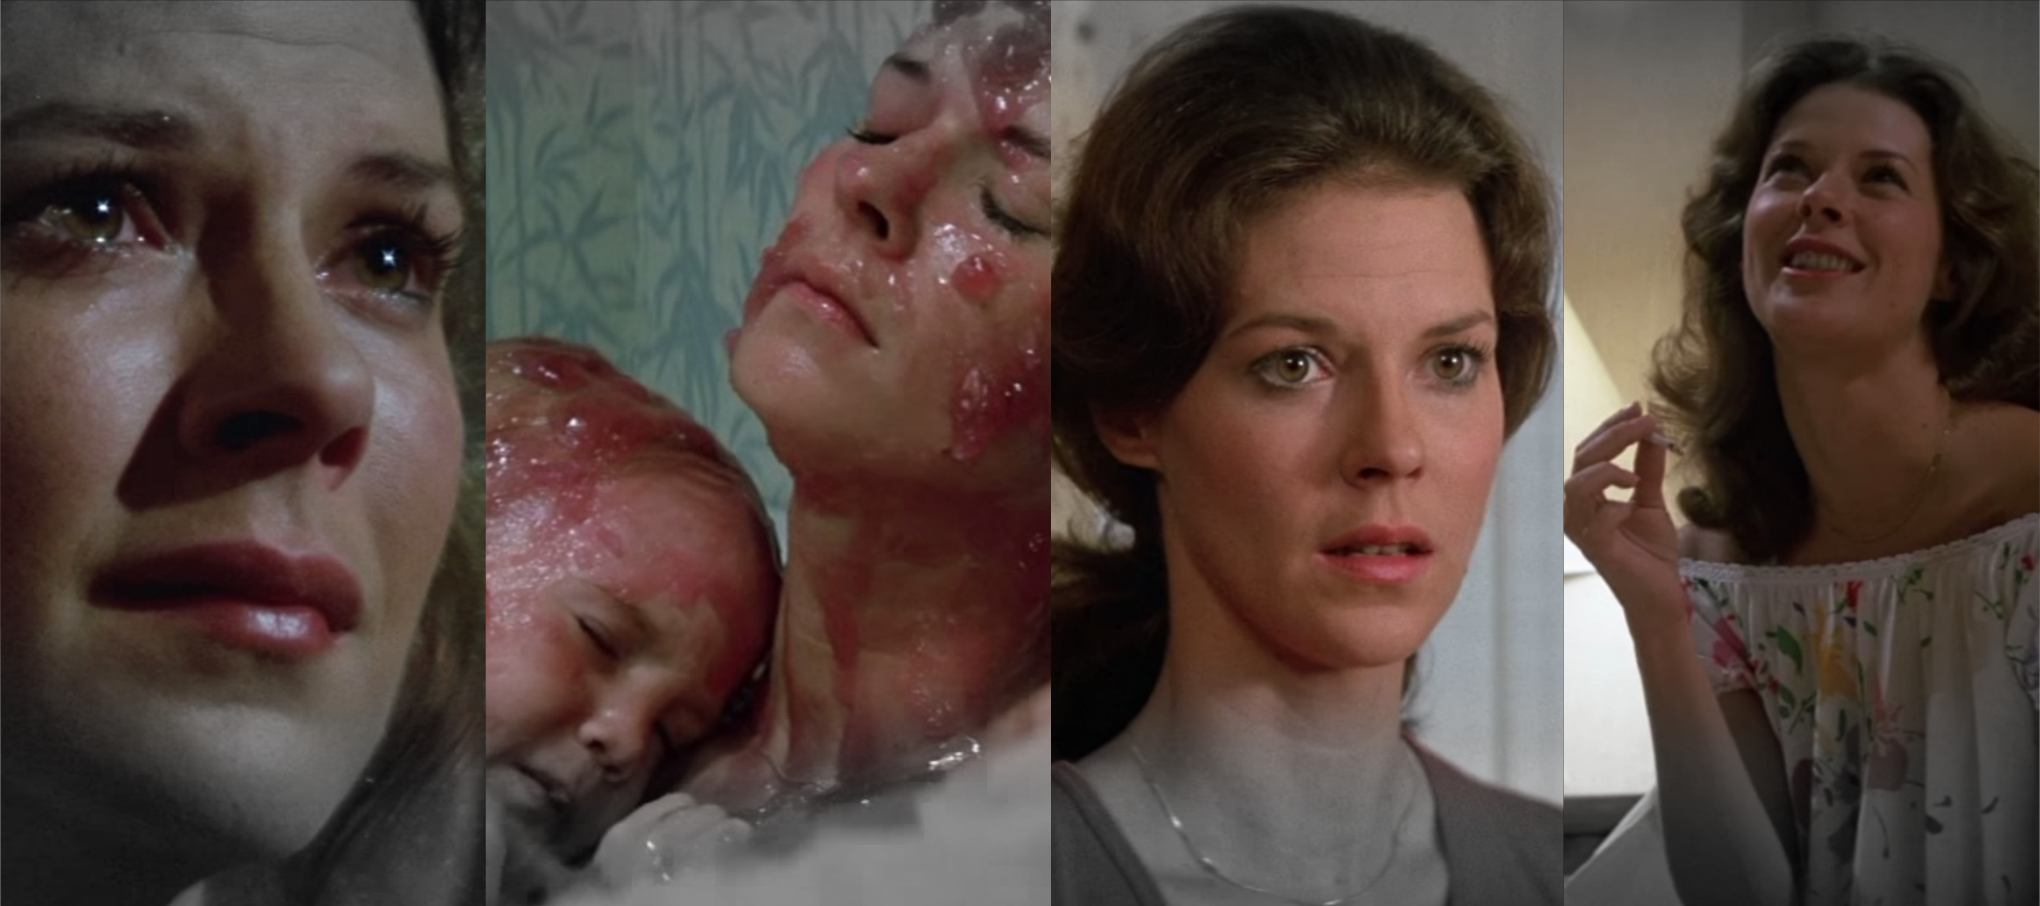 Ultimate horror Mom!

HL wishes a VERY Happy Birthday to Poltergeist star JoBeth Williams. (Martyn) 